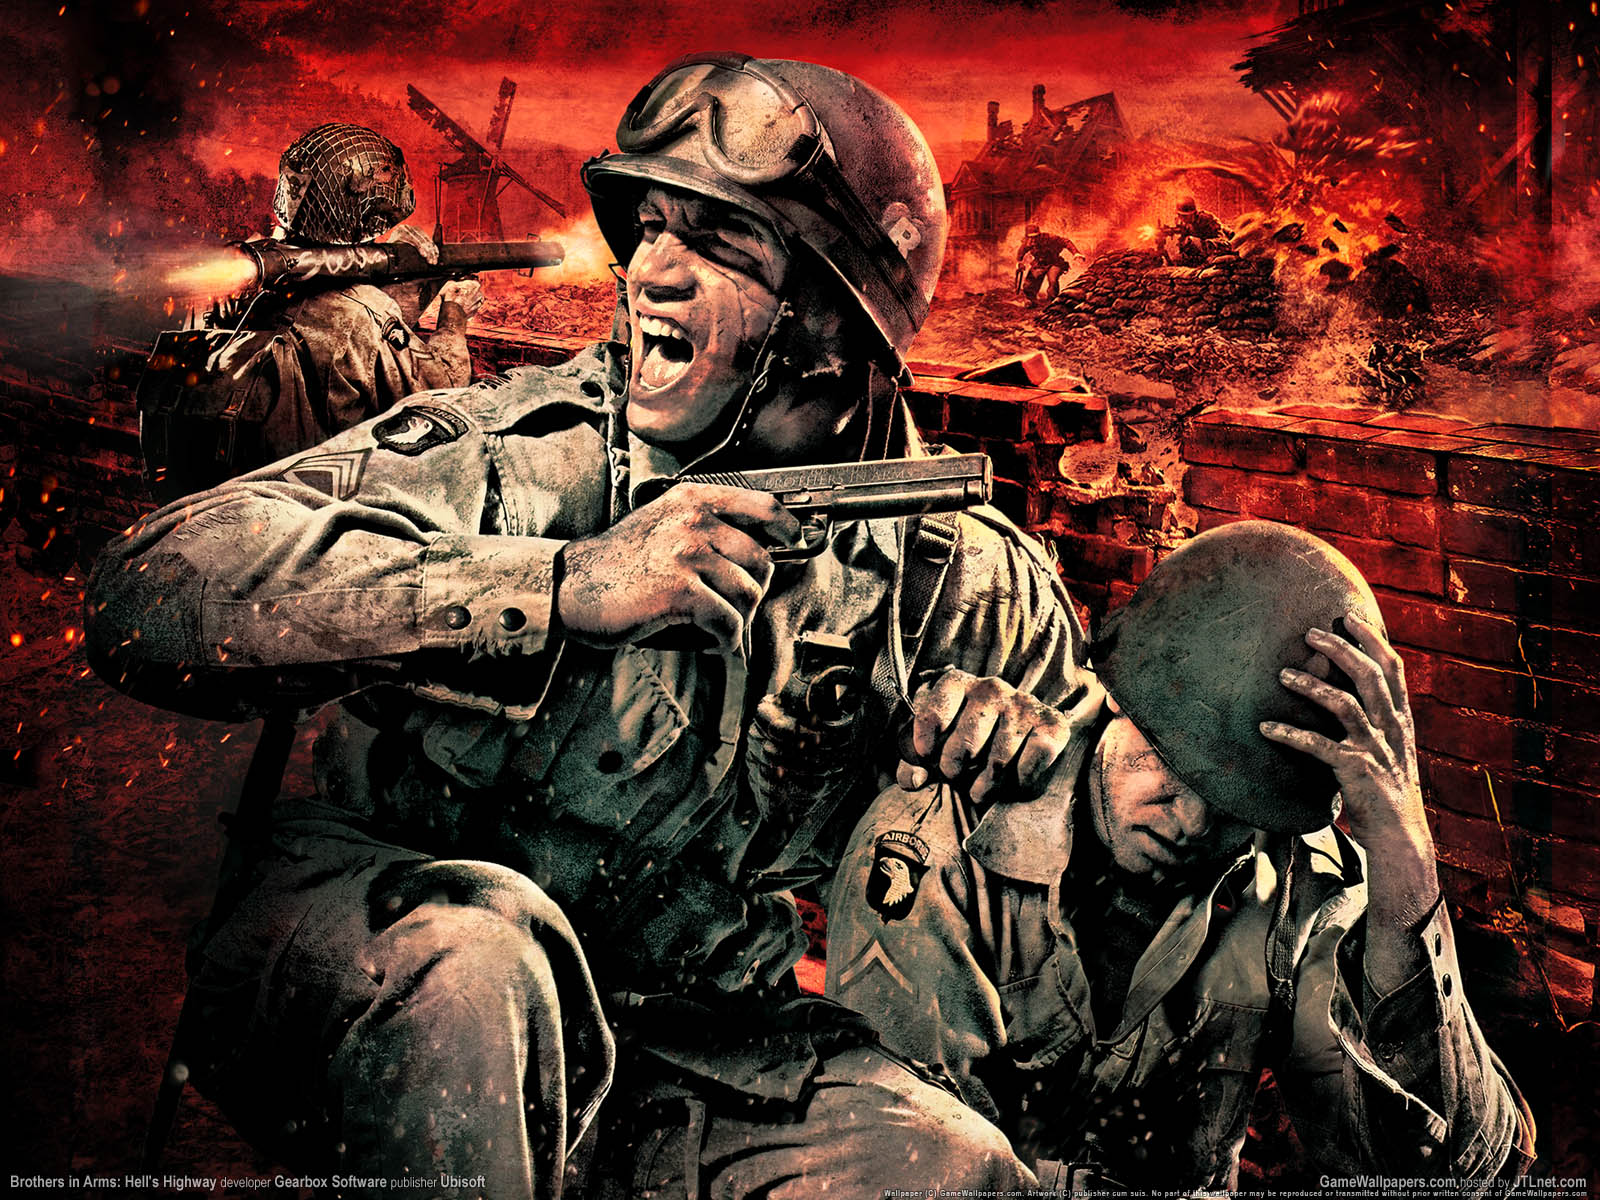 Brothers in Arms%253A Hell%255C%2527s Highway wallpaper 06 1600x1200